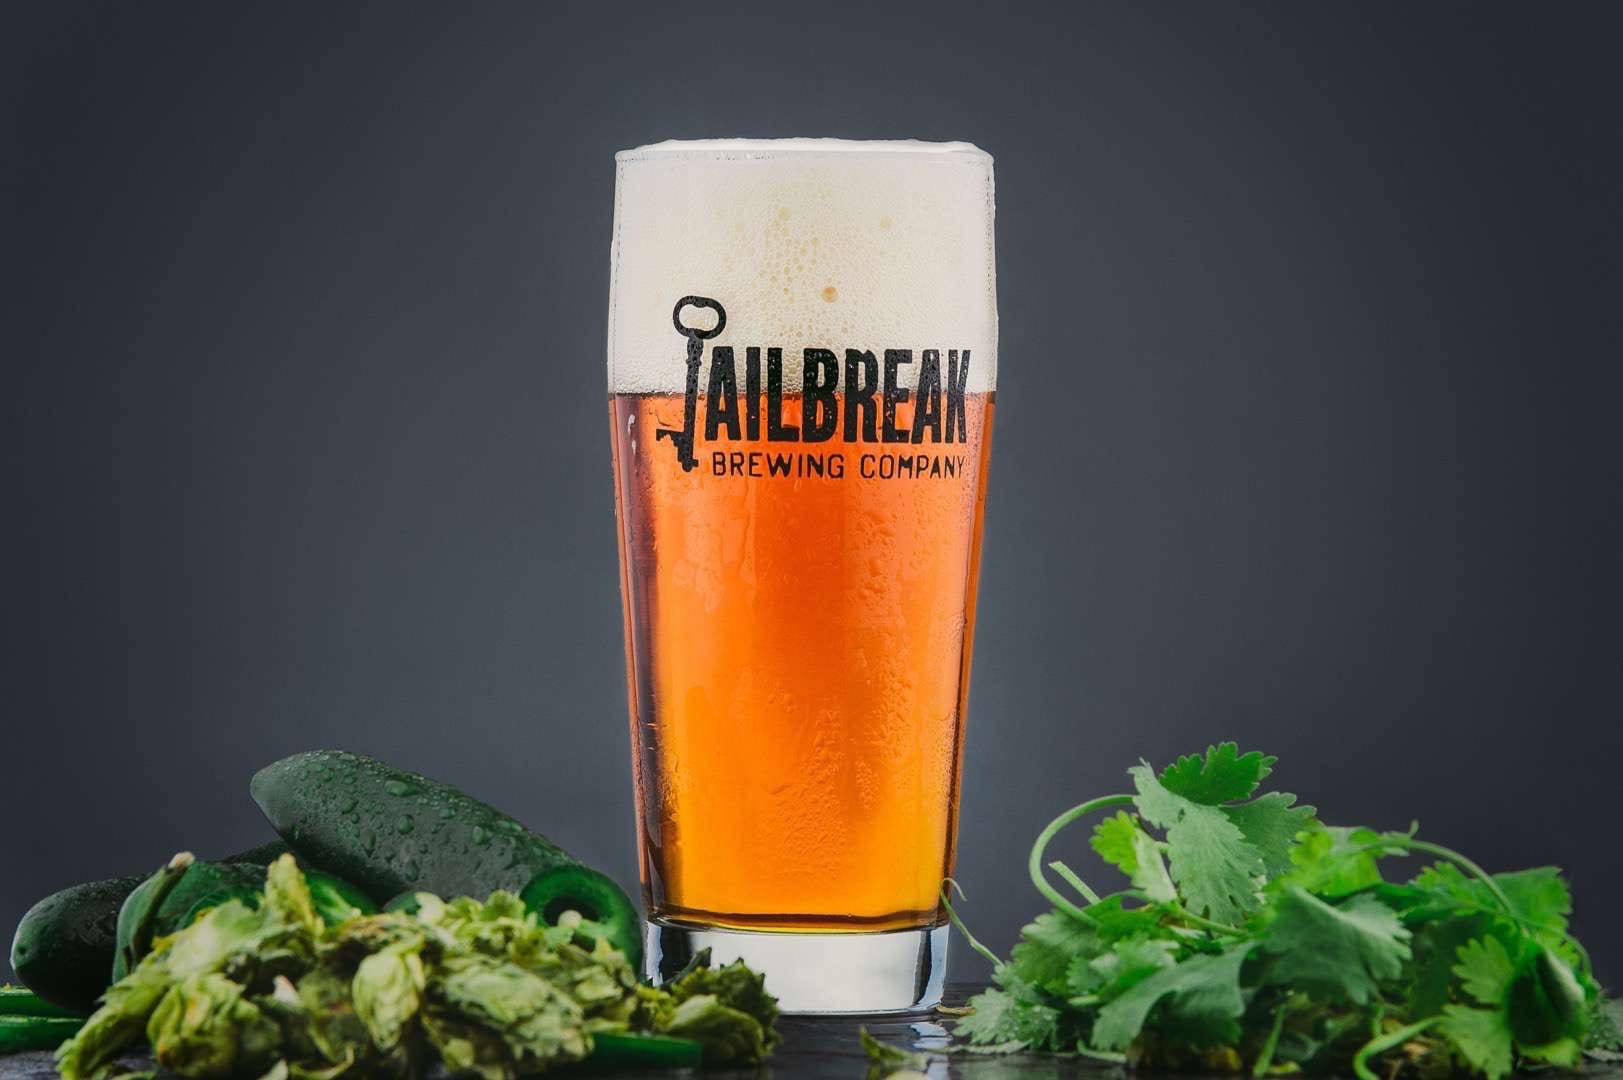 C&I Jailbreak Brewing Closeup of a mostly orange colored glass of ale drink made by Jailbreak Brewing Company. The glass is surrounded by jalapenos and herbs.